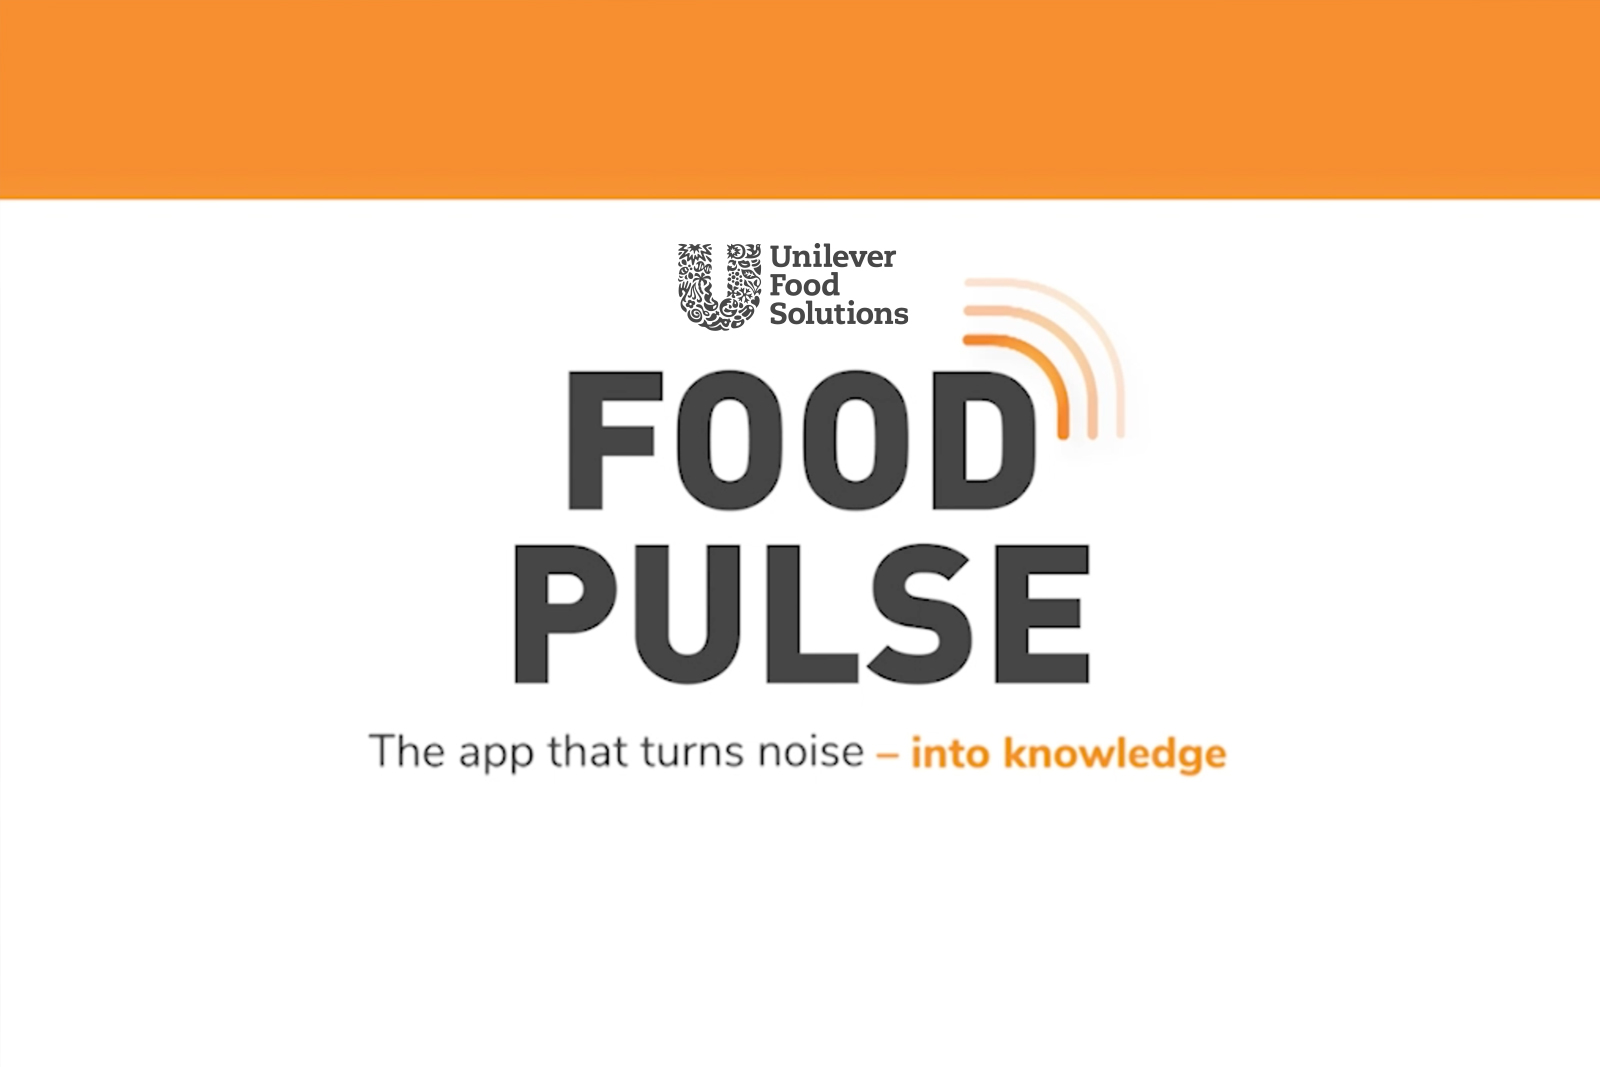 Food Pulse: The App that Turns Noise into Knowledge